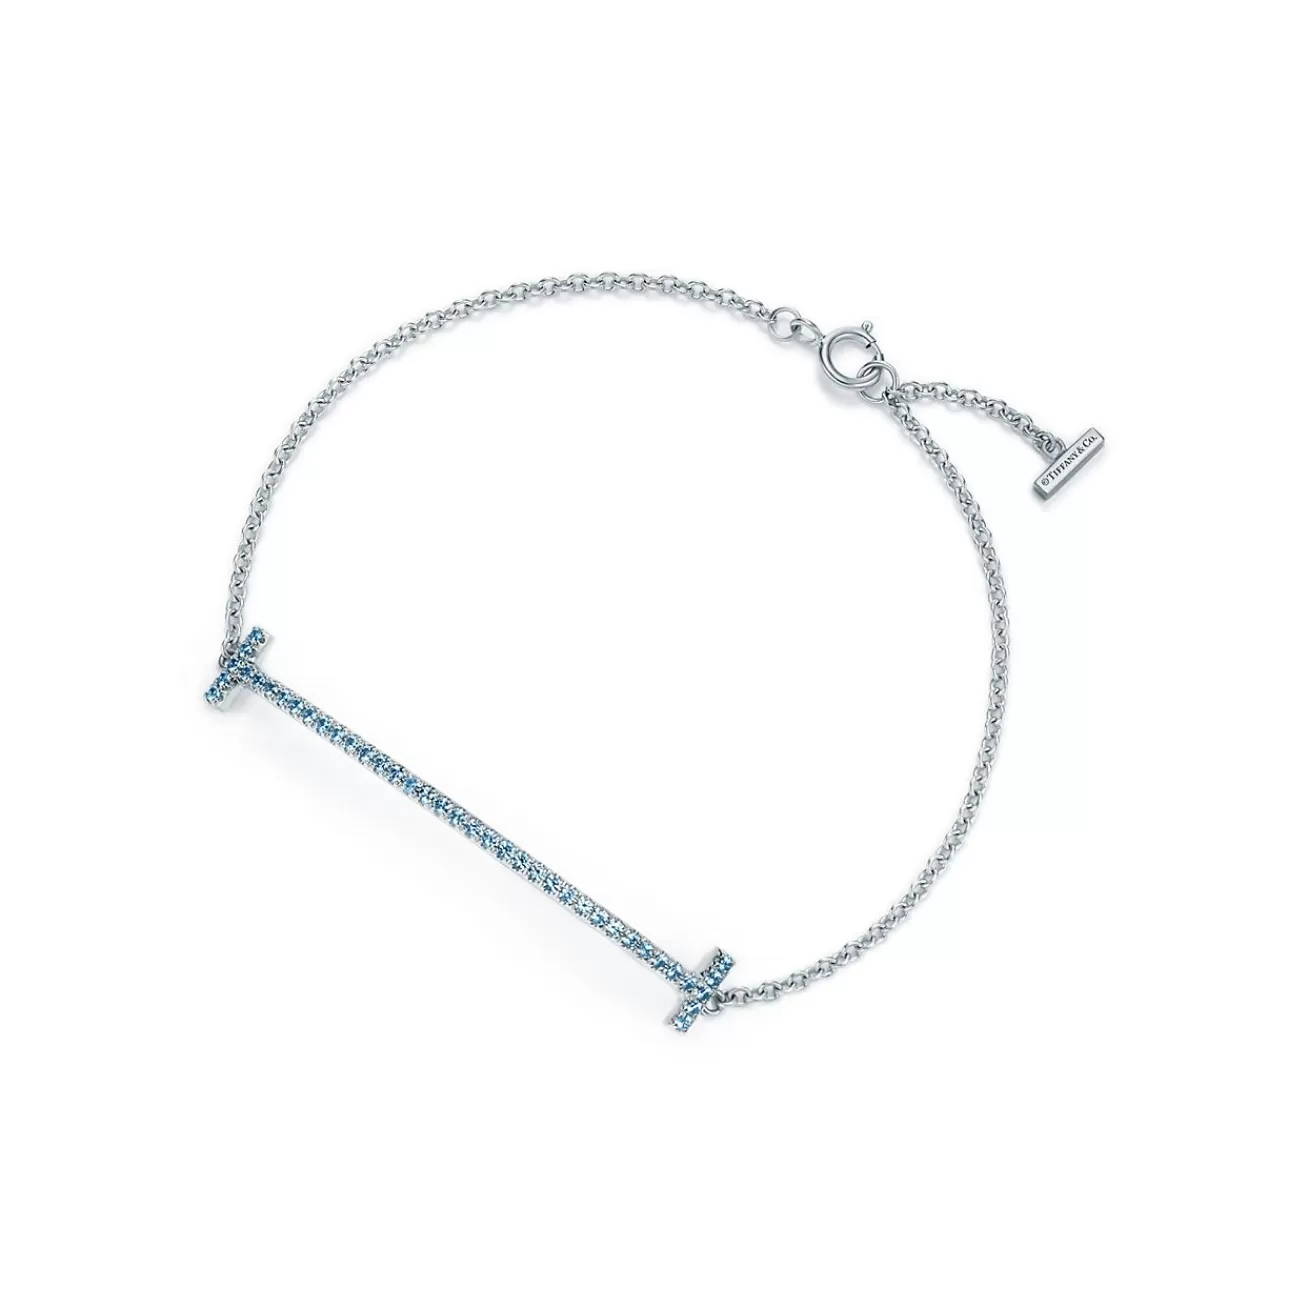 Tiffany & Co. Tiffany T Smile Chain Bracelet in White Gold with Blue Topaz | ^ Bracelets | Colored Gemstone Jewelry